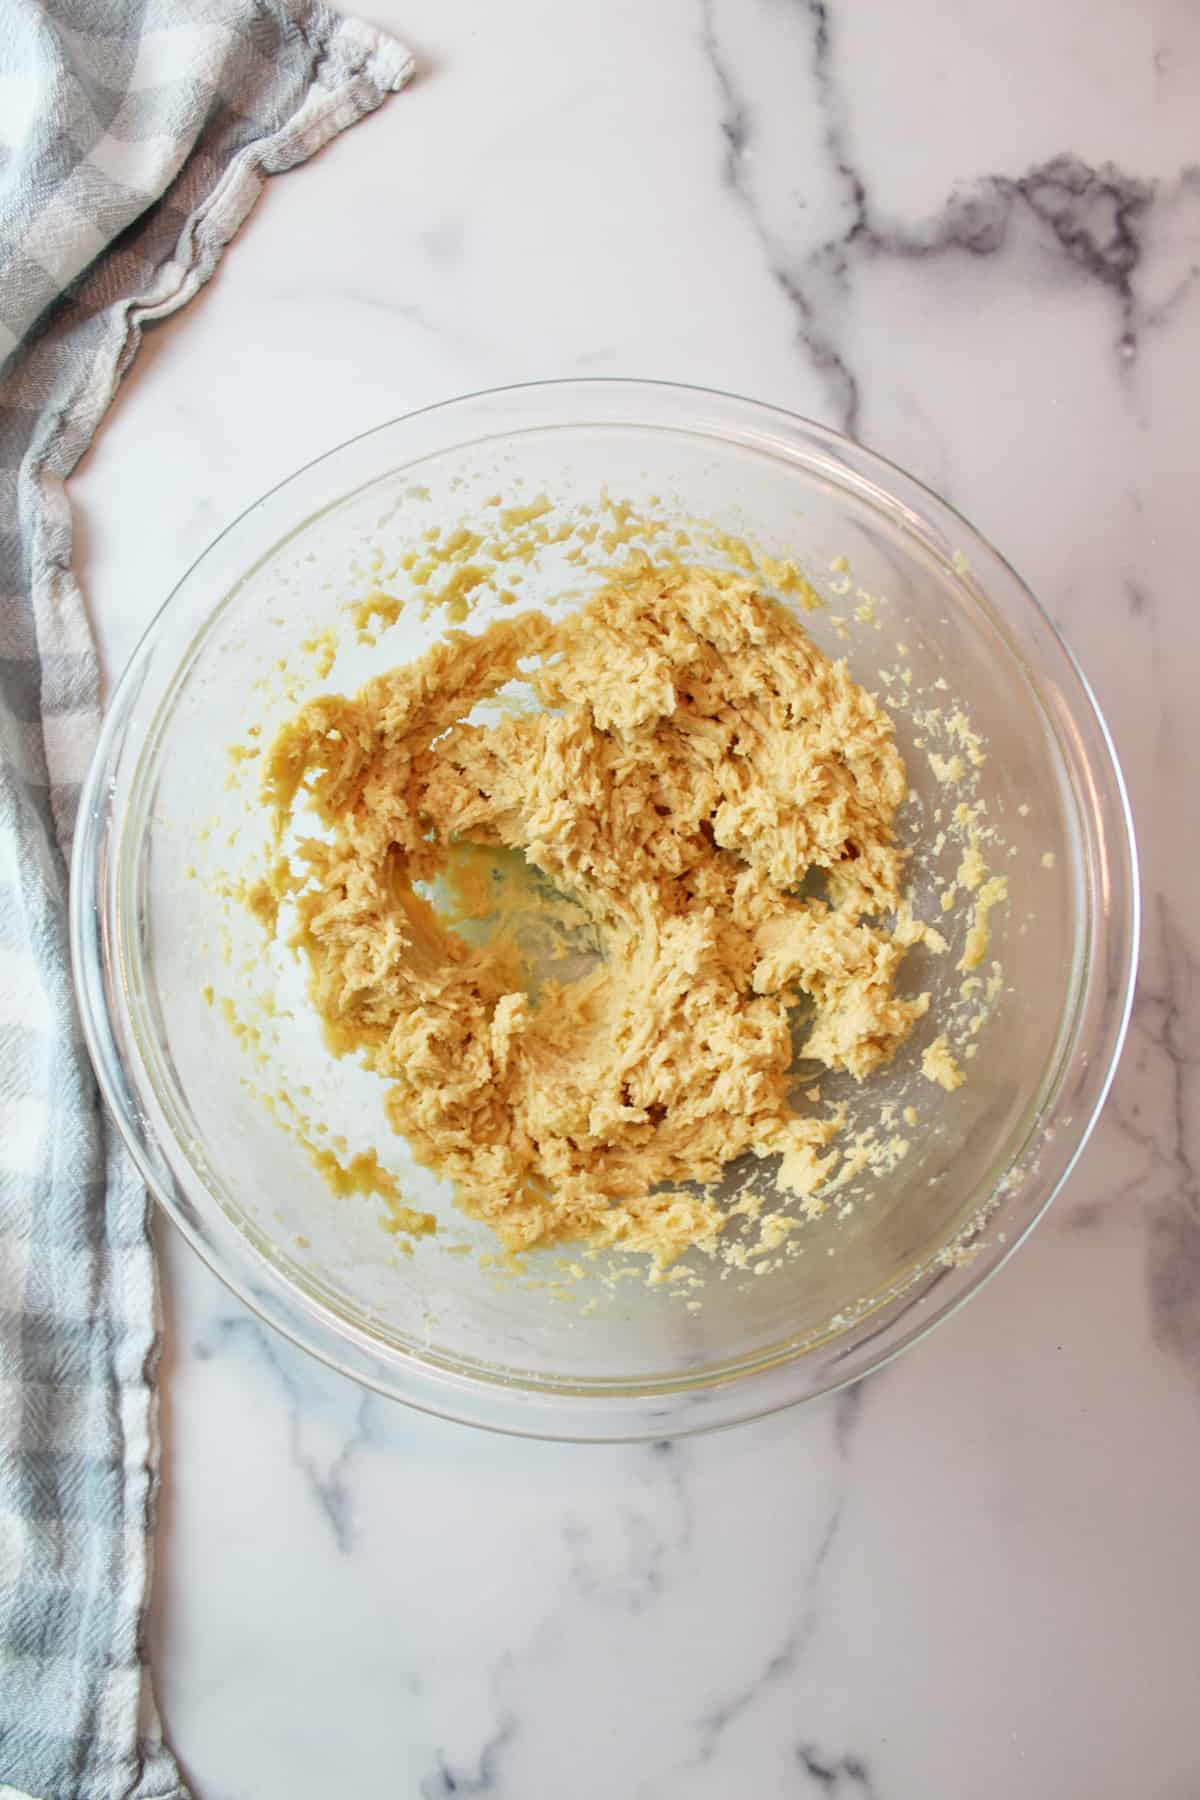 creamy egg and sugar mixture for cookies in a bowl.